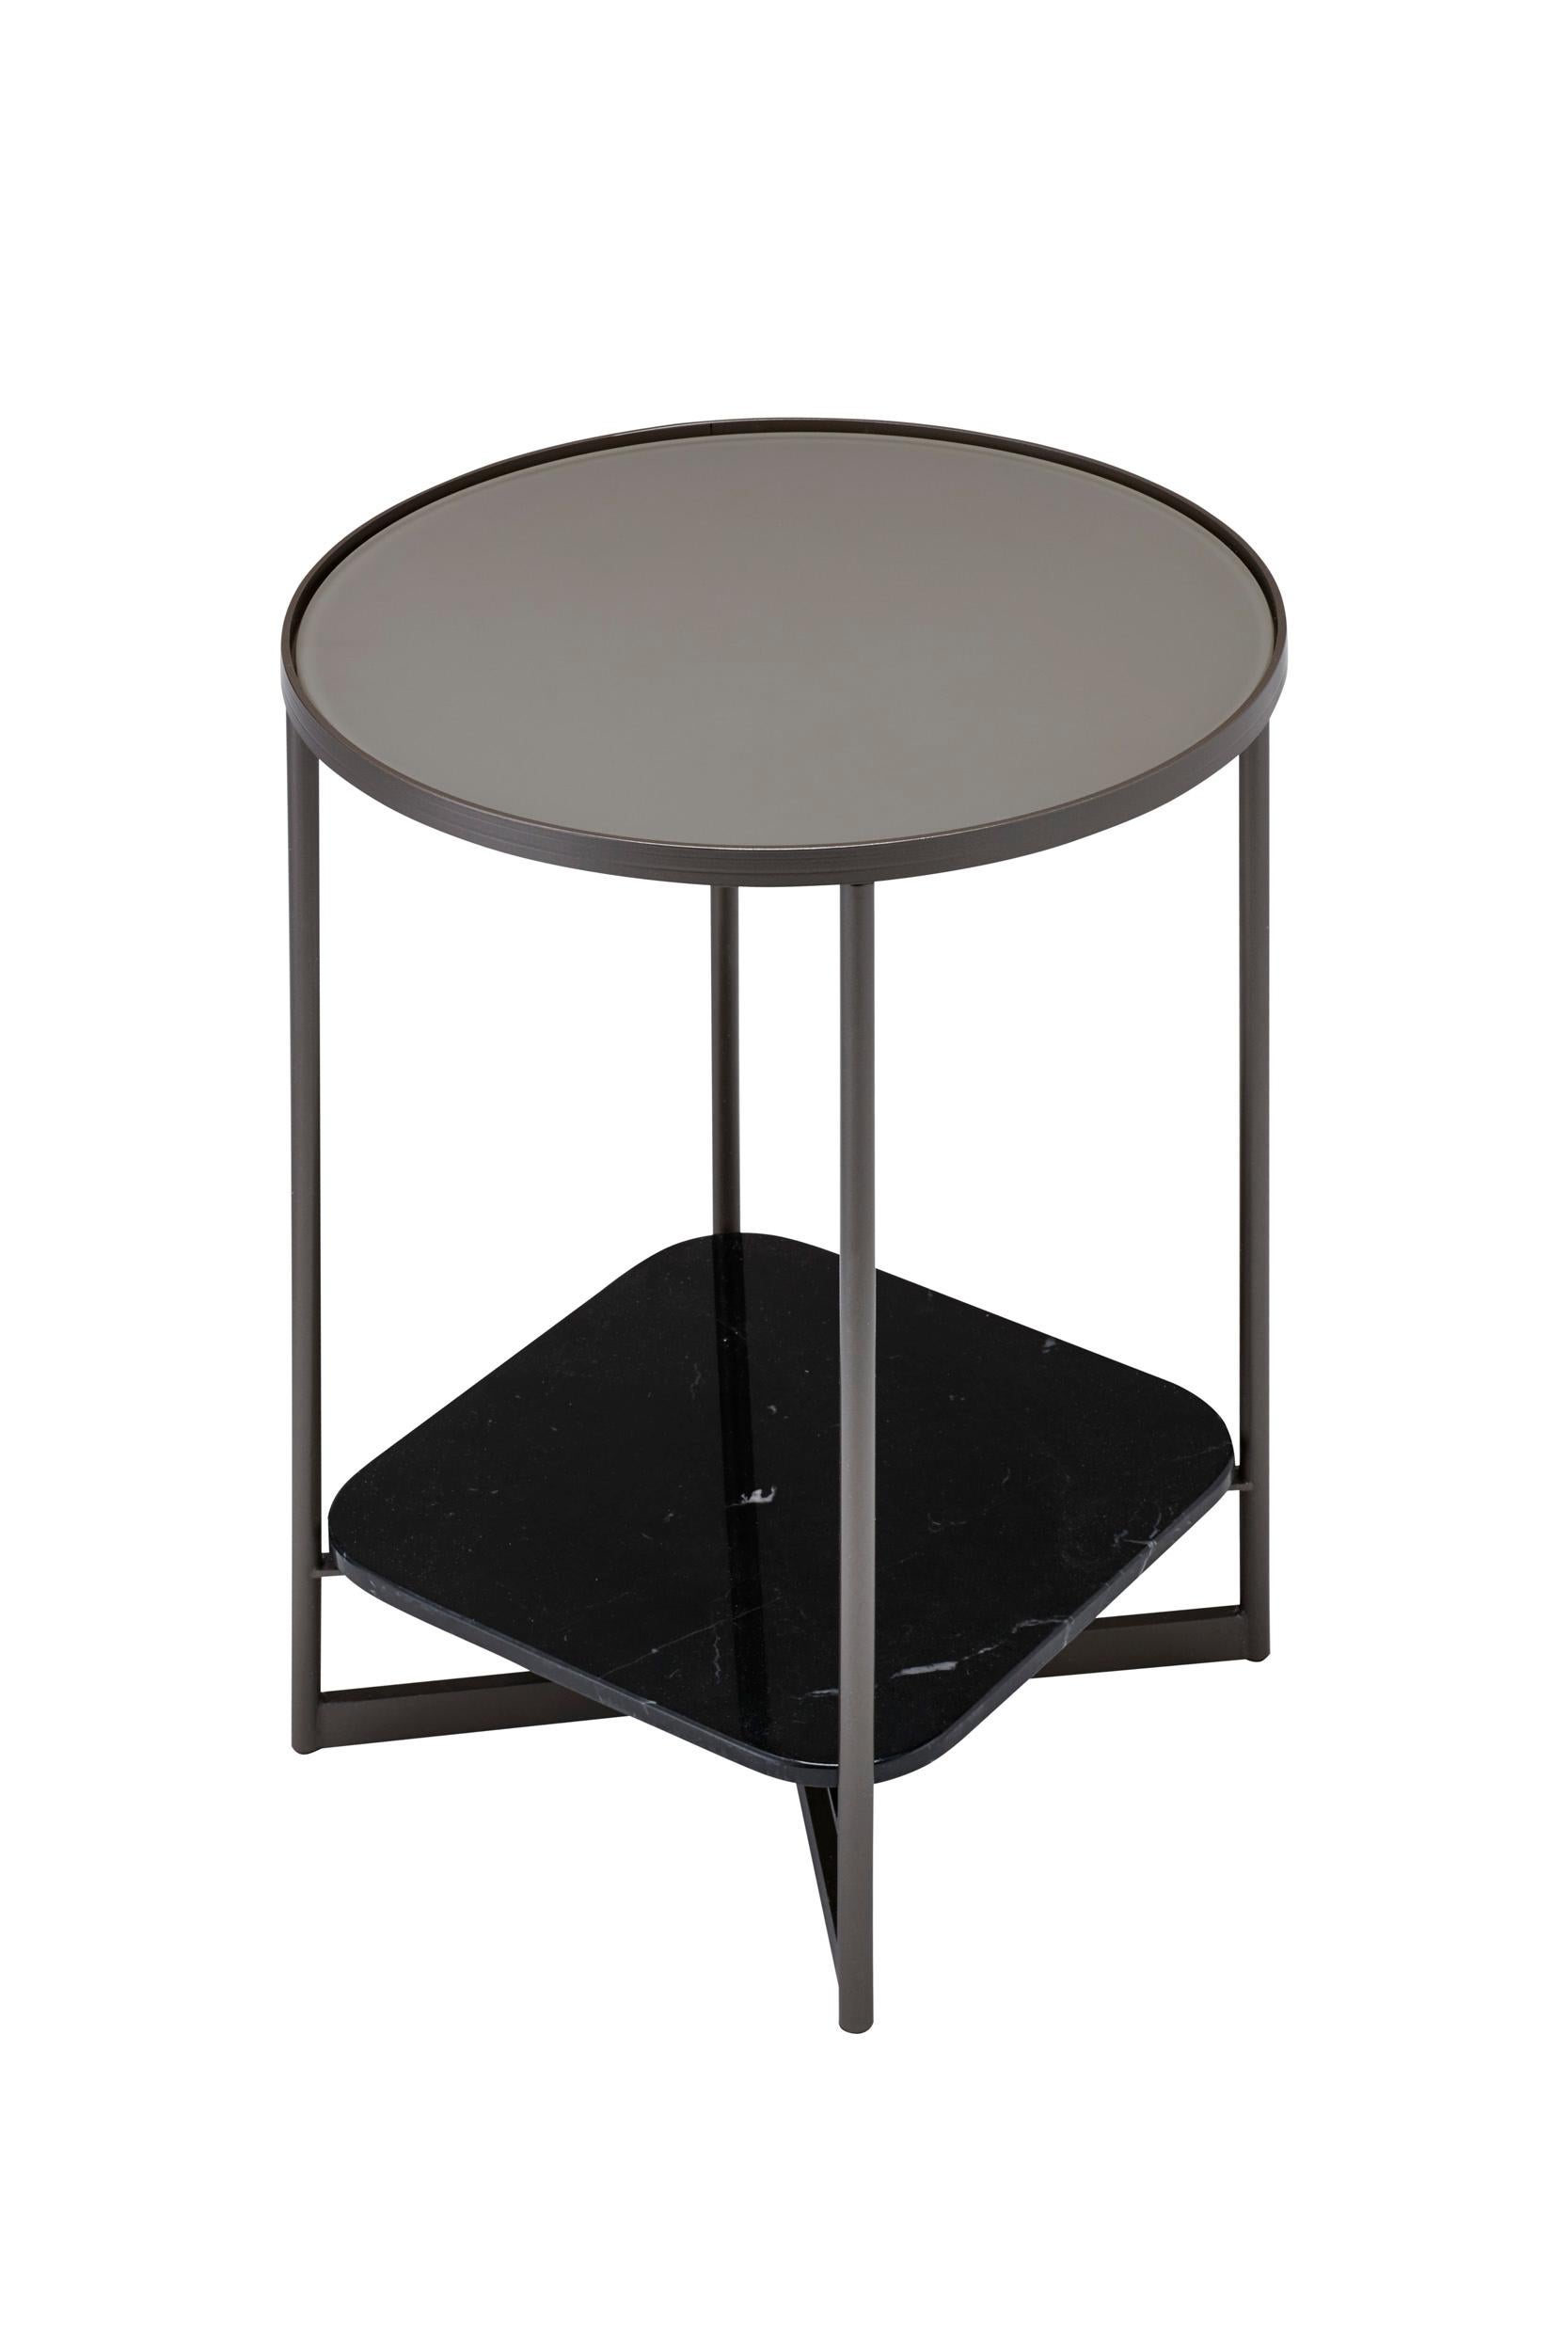 A series of modern, complementary tables that combine marble and glass, supported by a fine gauge steel frame that celebrates the beauty of industry. Utilitarian in approach, Mohana occasional tables are both functional and thoughtfully detailed.